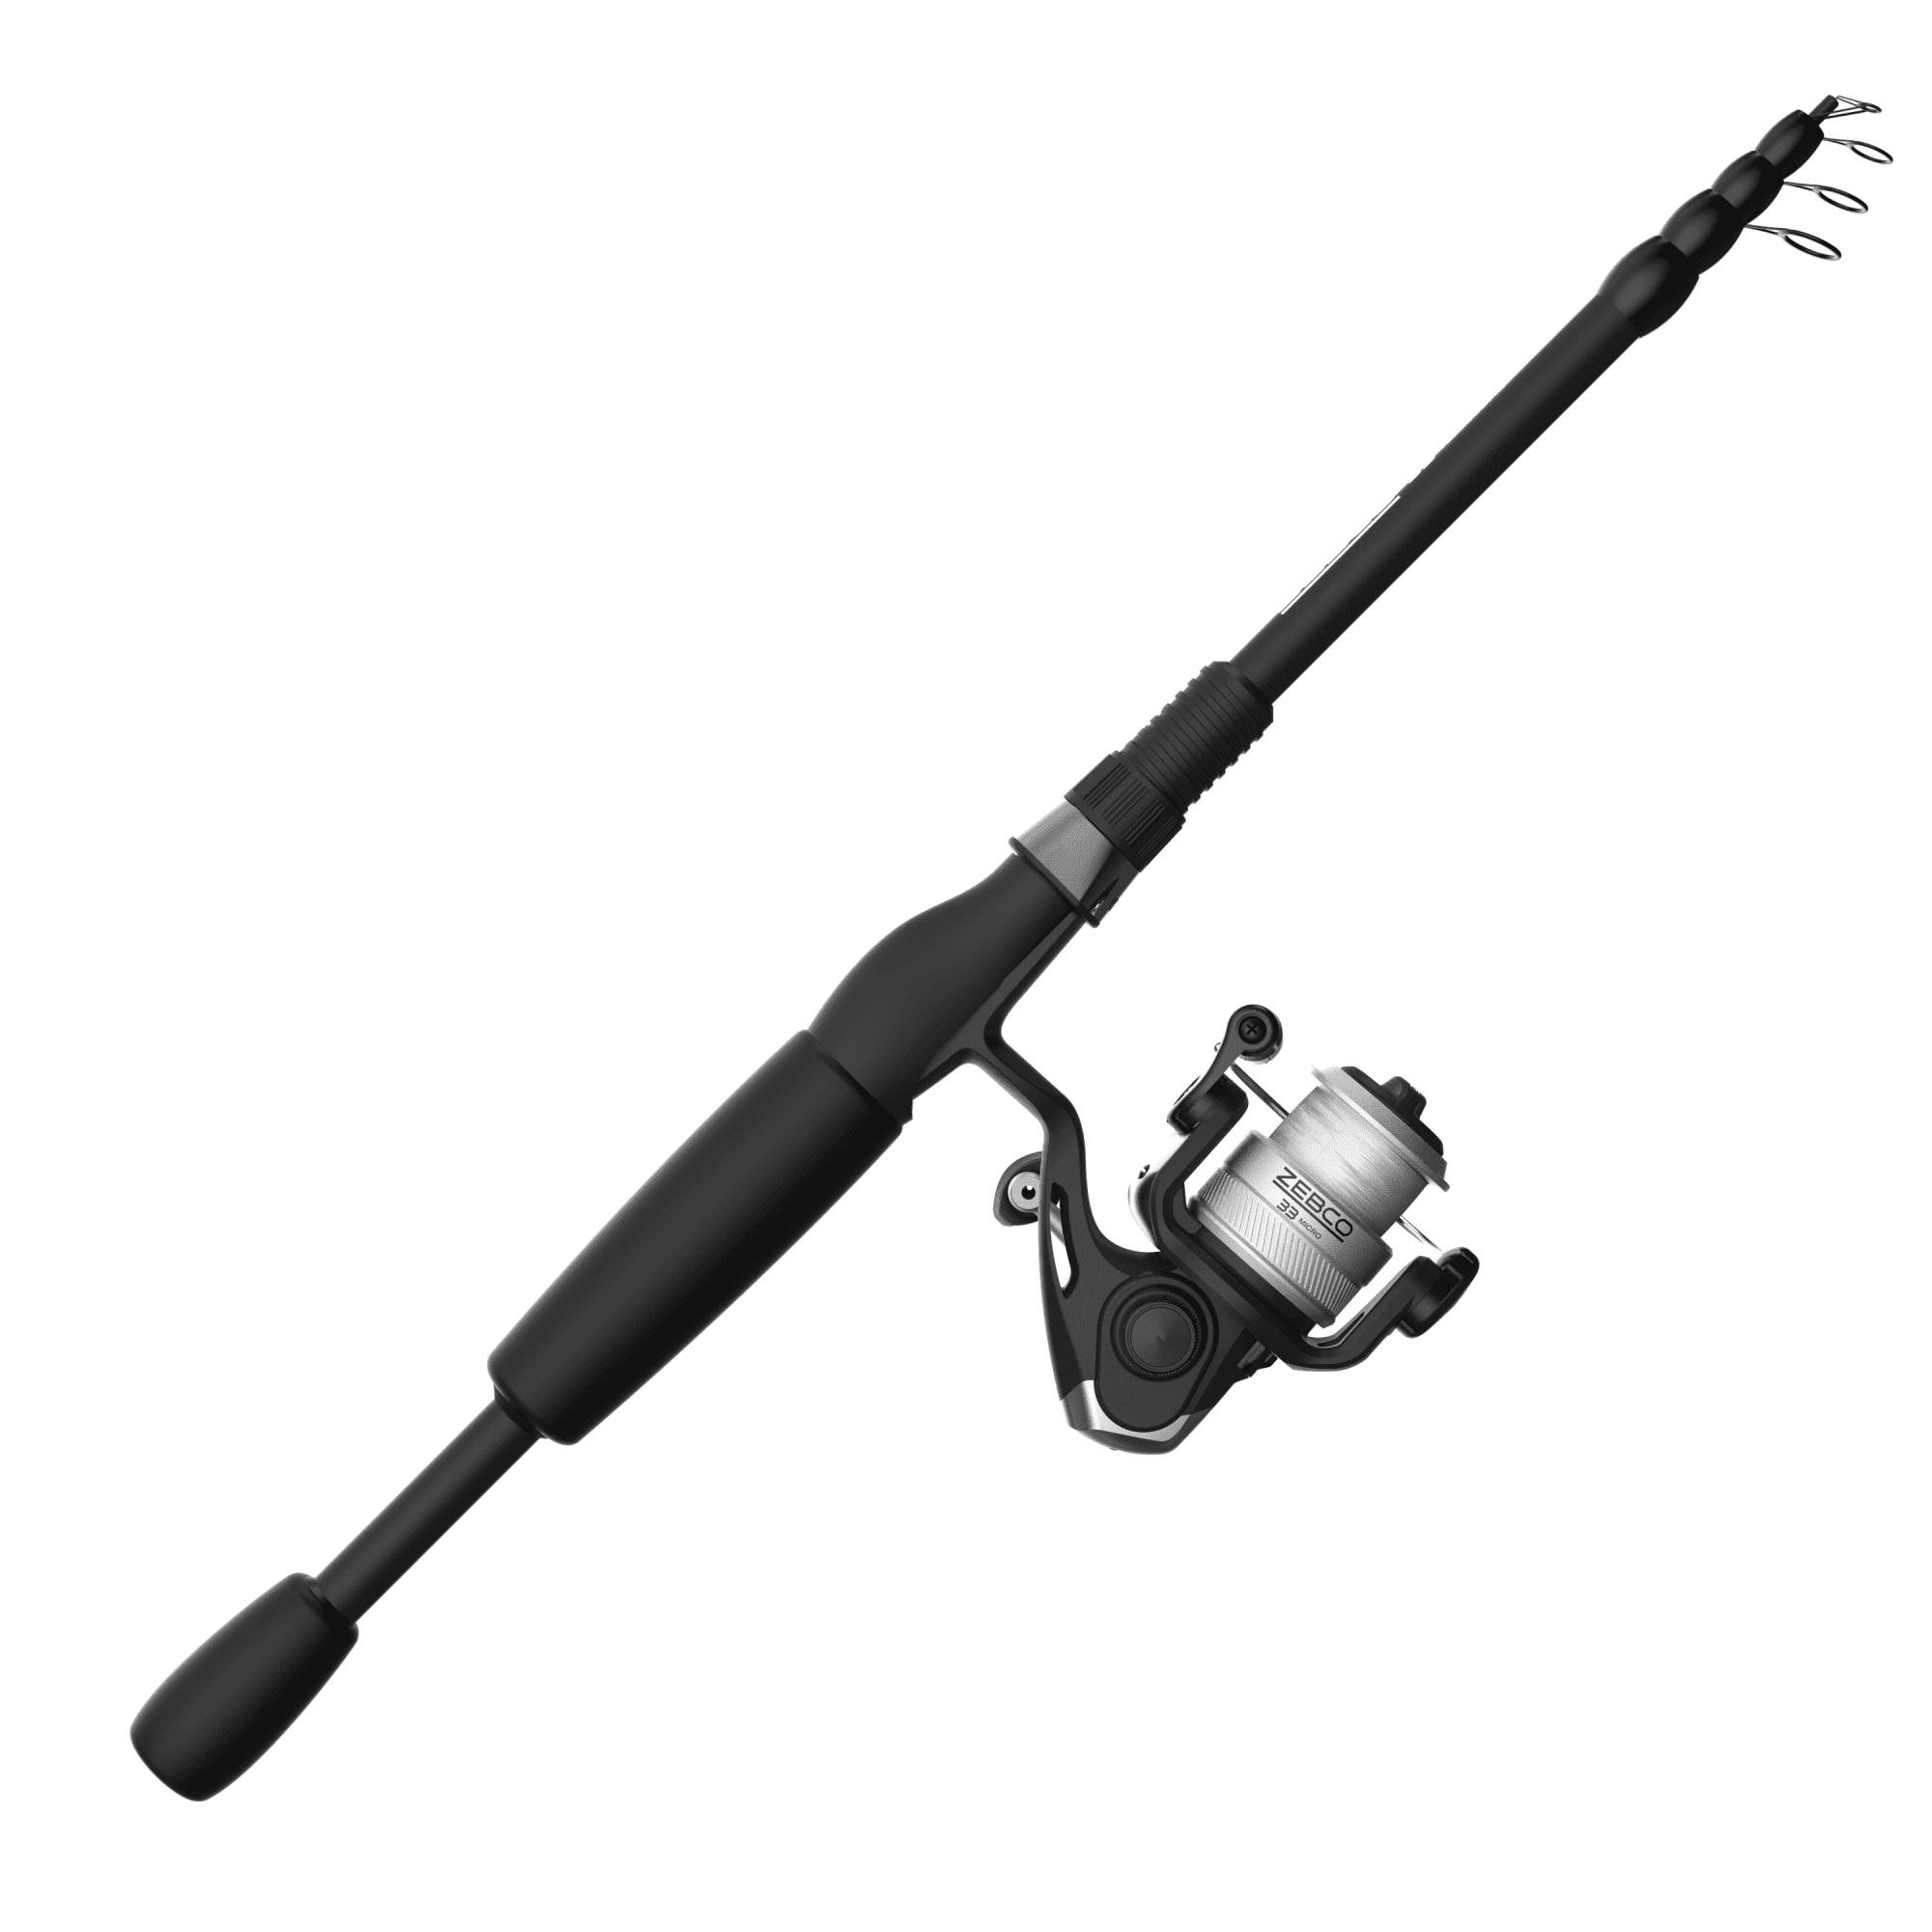 Zebco 33 Micro Spinning Reel and Telescopic Fishing Rod Combo, Extendable  19-Inch to 5-Foot Telescopic Fishing Pole with ComfortGrip Rod Handle